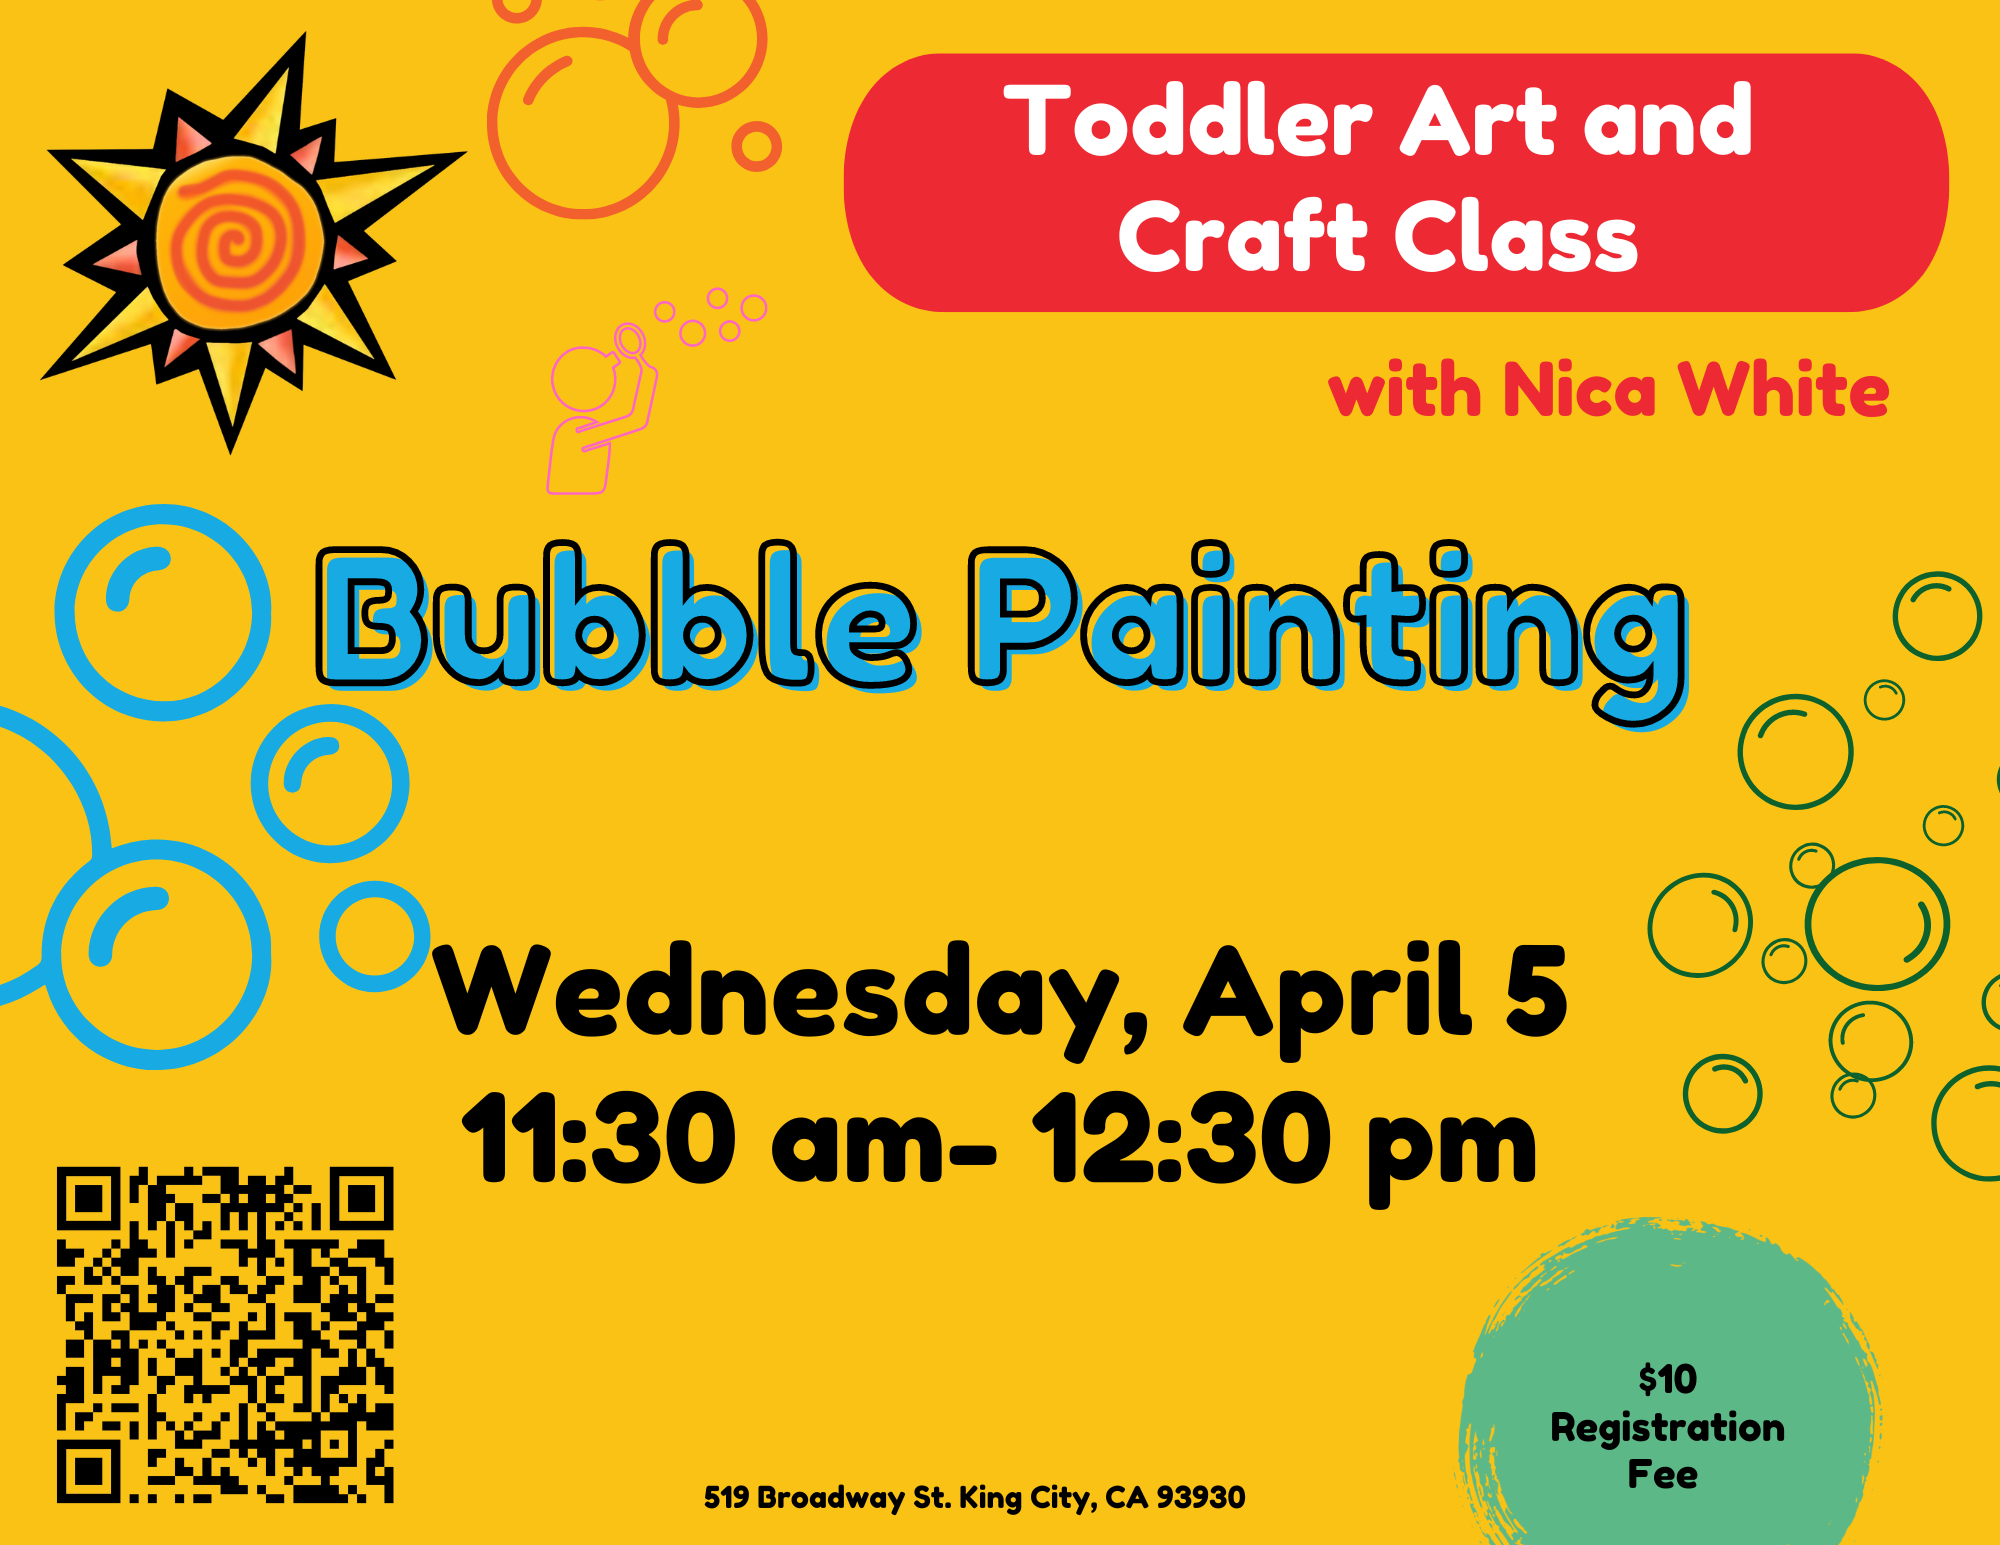 Flyer- Bubble Painting Toddler Art and Craft Class. Wednesday, April 5 11:30 am - 12 pm.